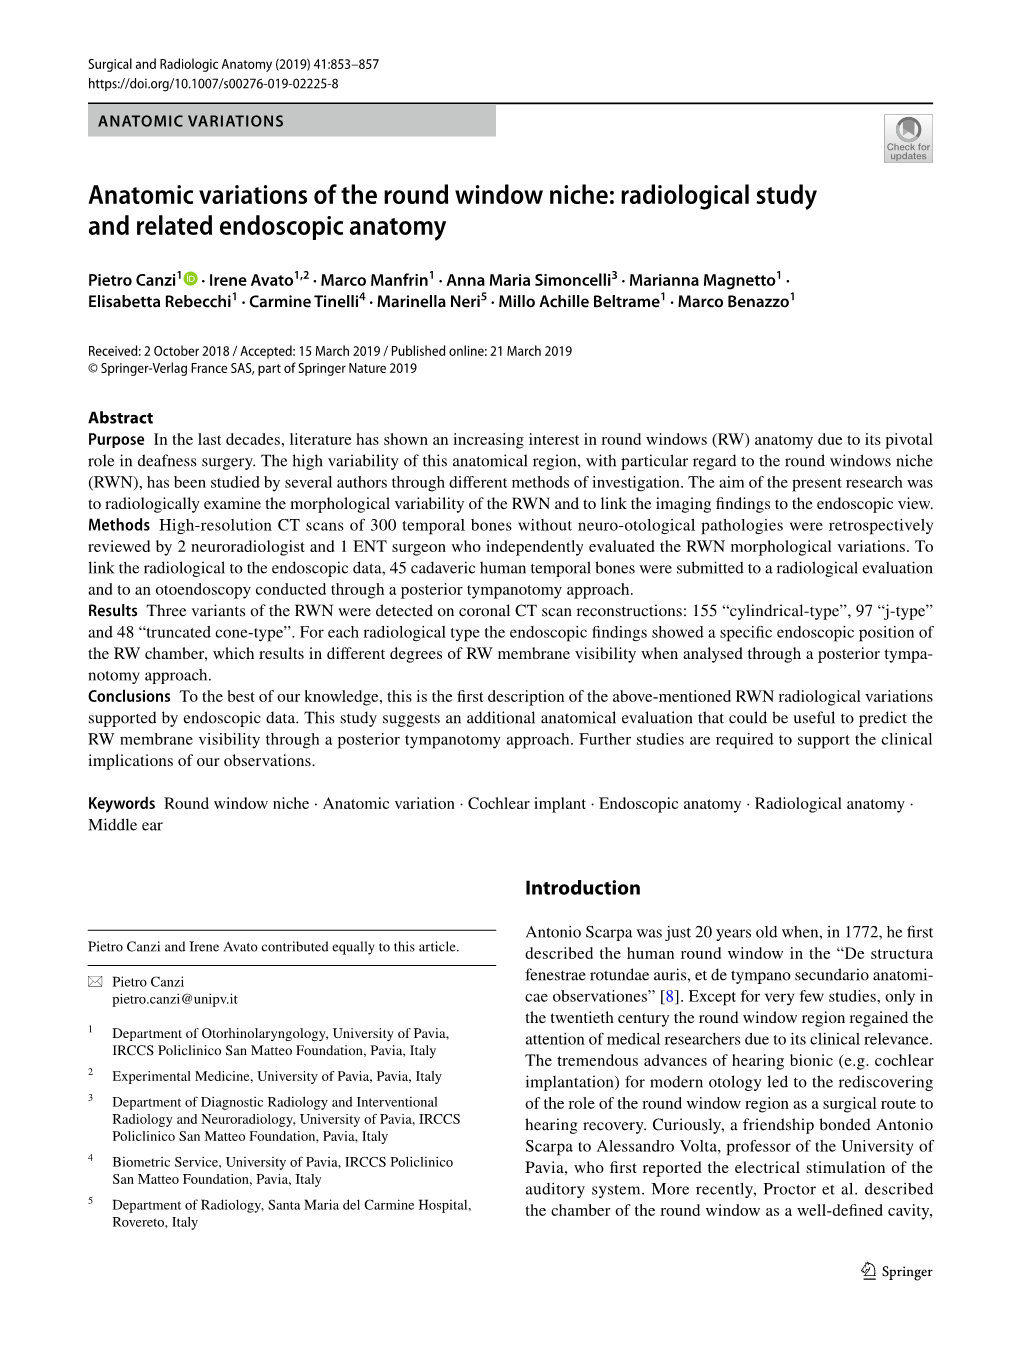 Anatomic Variations of the Round Window Niche: Radiological Study and Related Endoscopic Anatomy